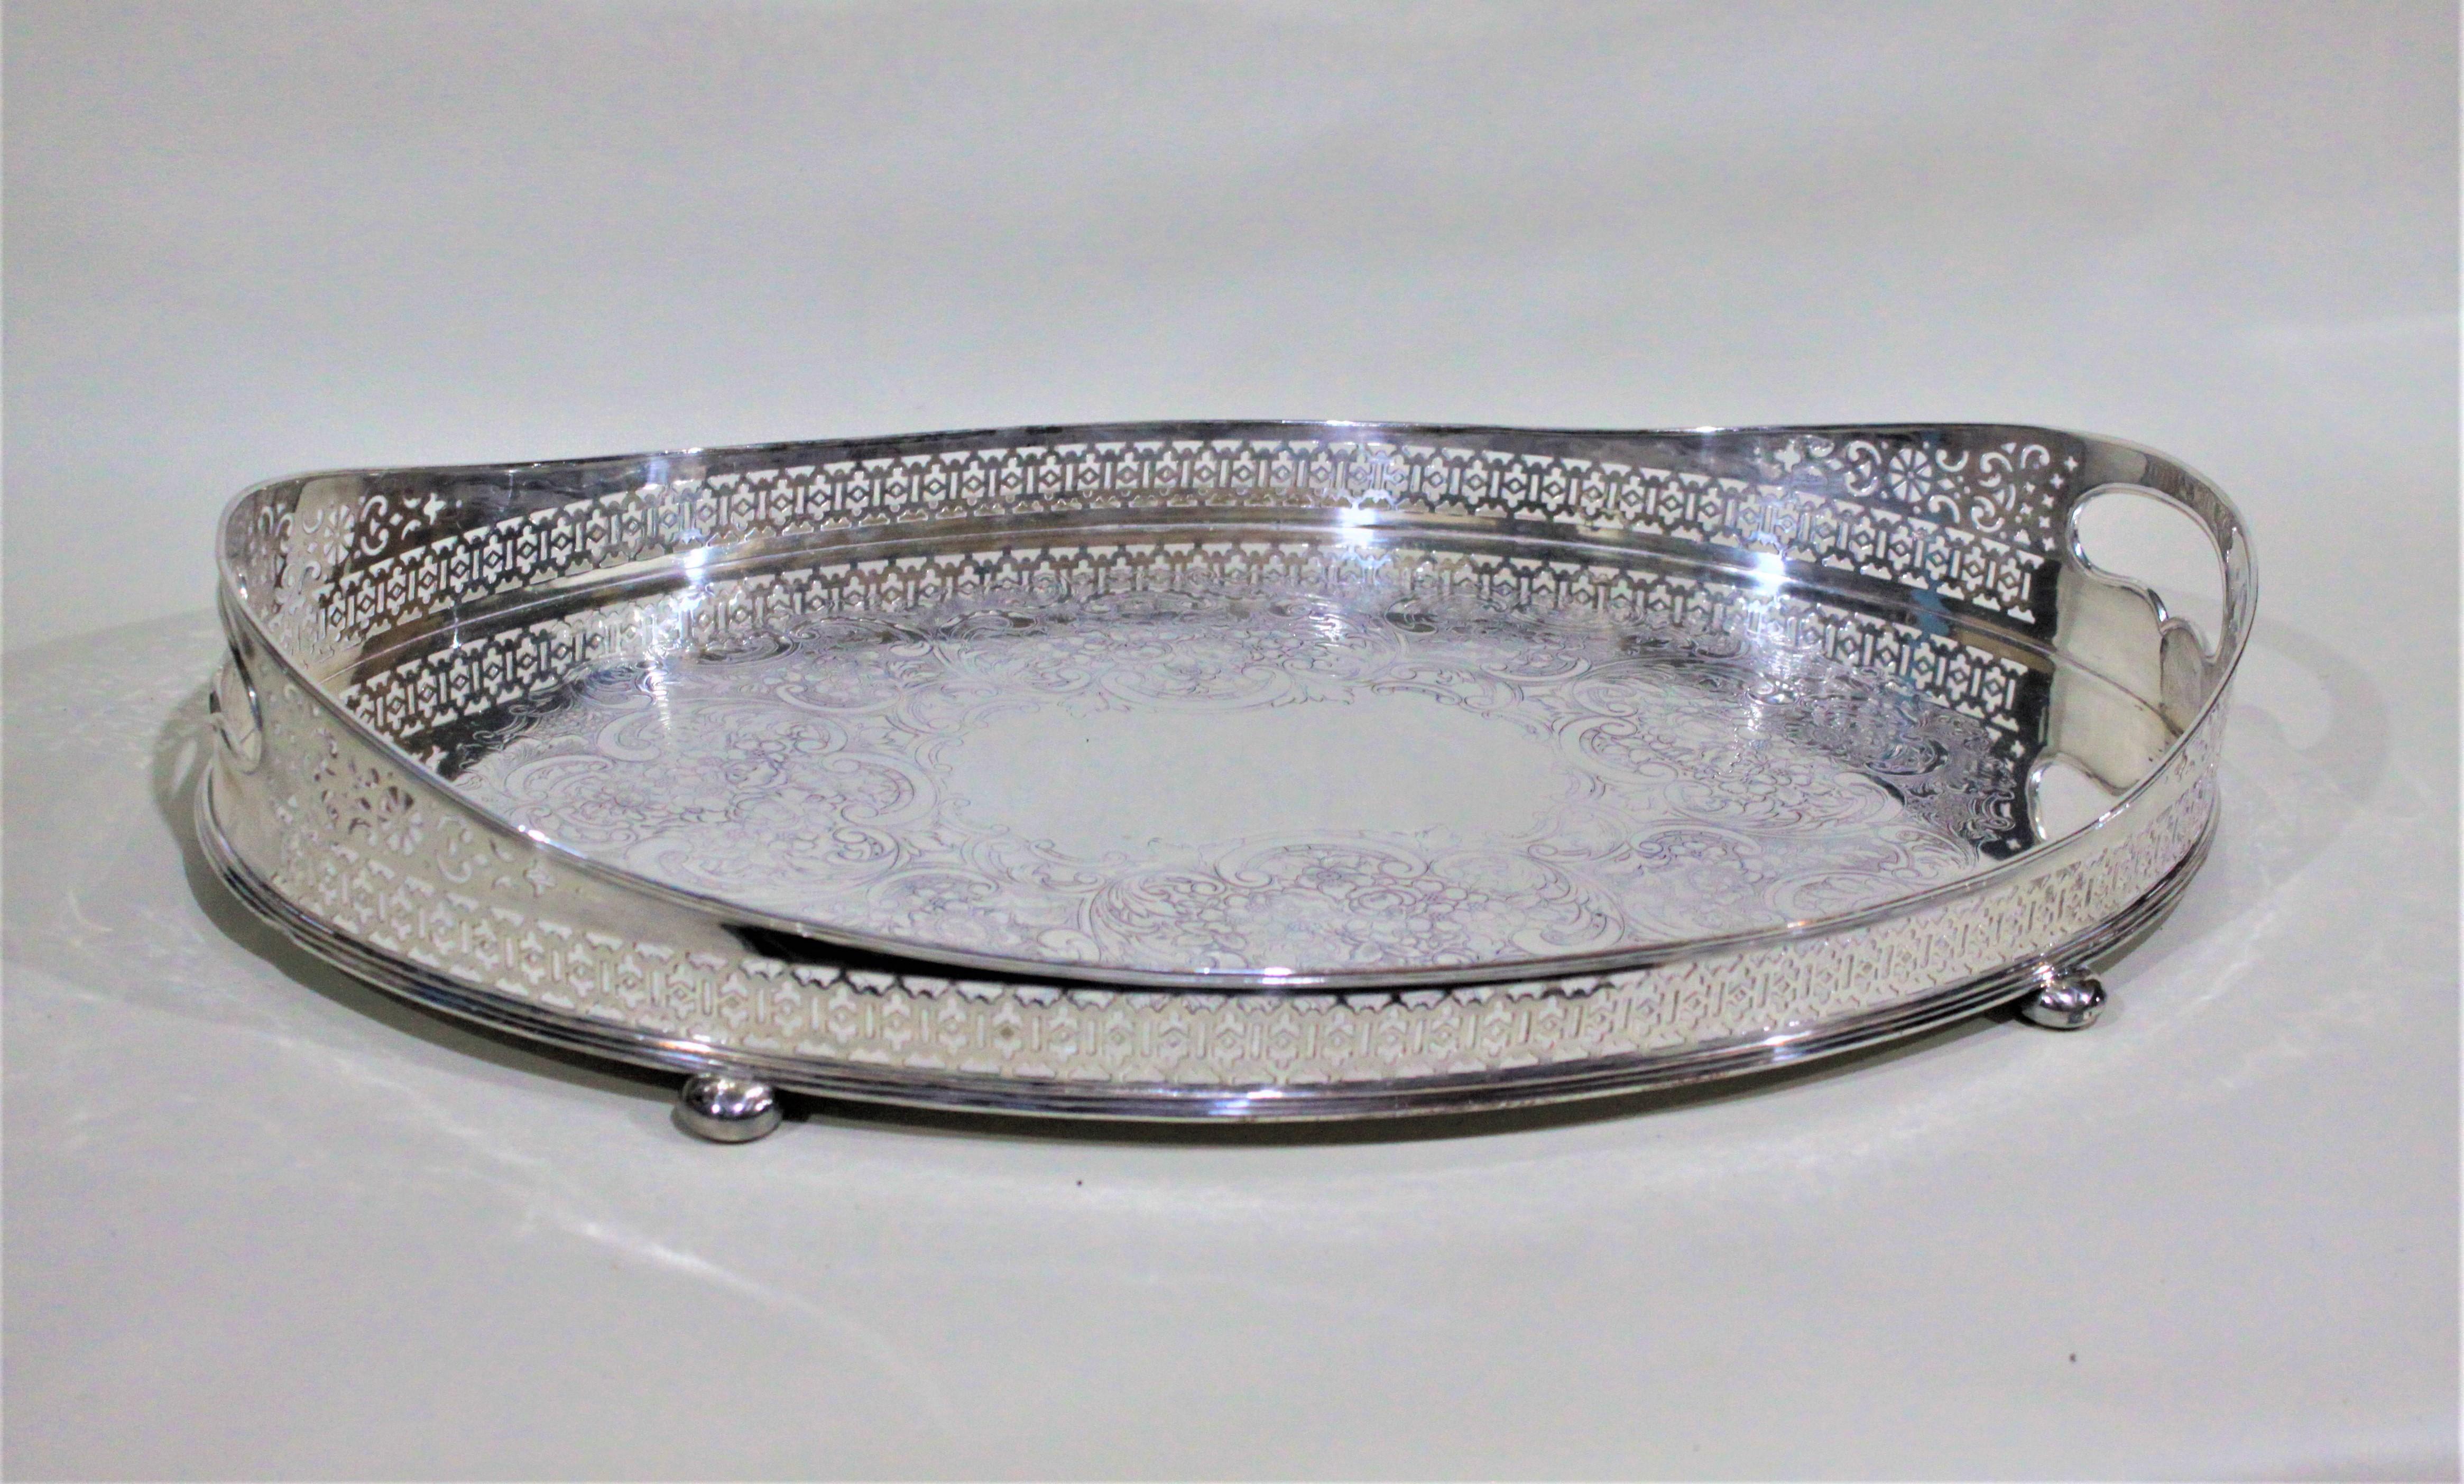 This large oval silver plated gallery serving tray is unmarked, but presumed to be made in England during the 1920s in the style of the Victorian Period. The tray has an ornately pierced gallery surround with handles fashioned into either end. The